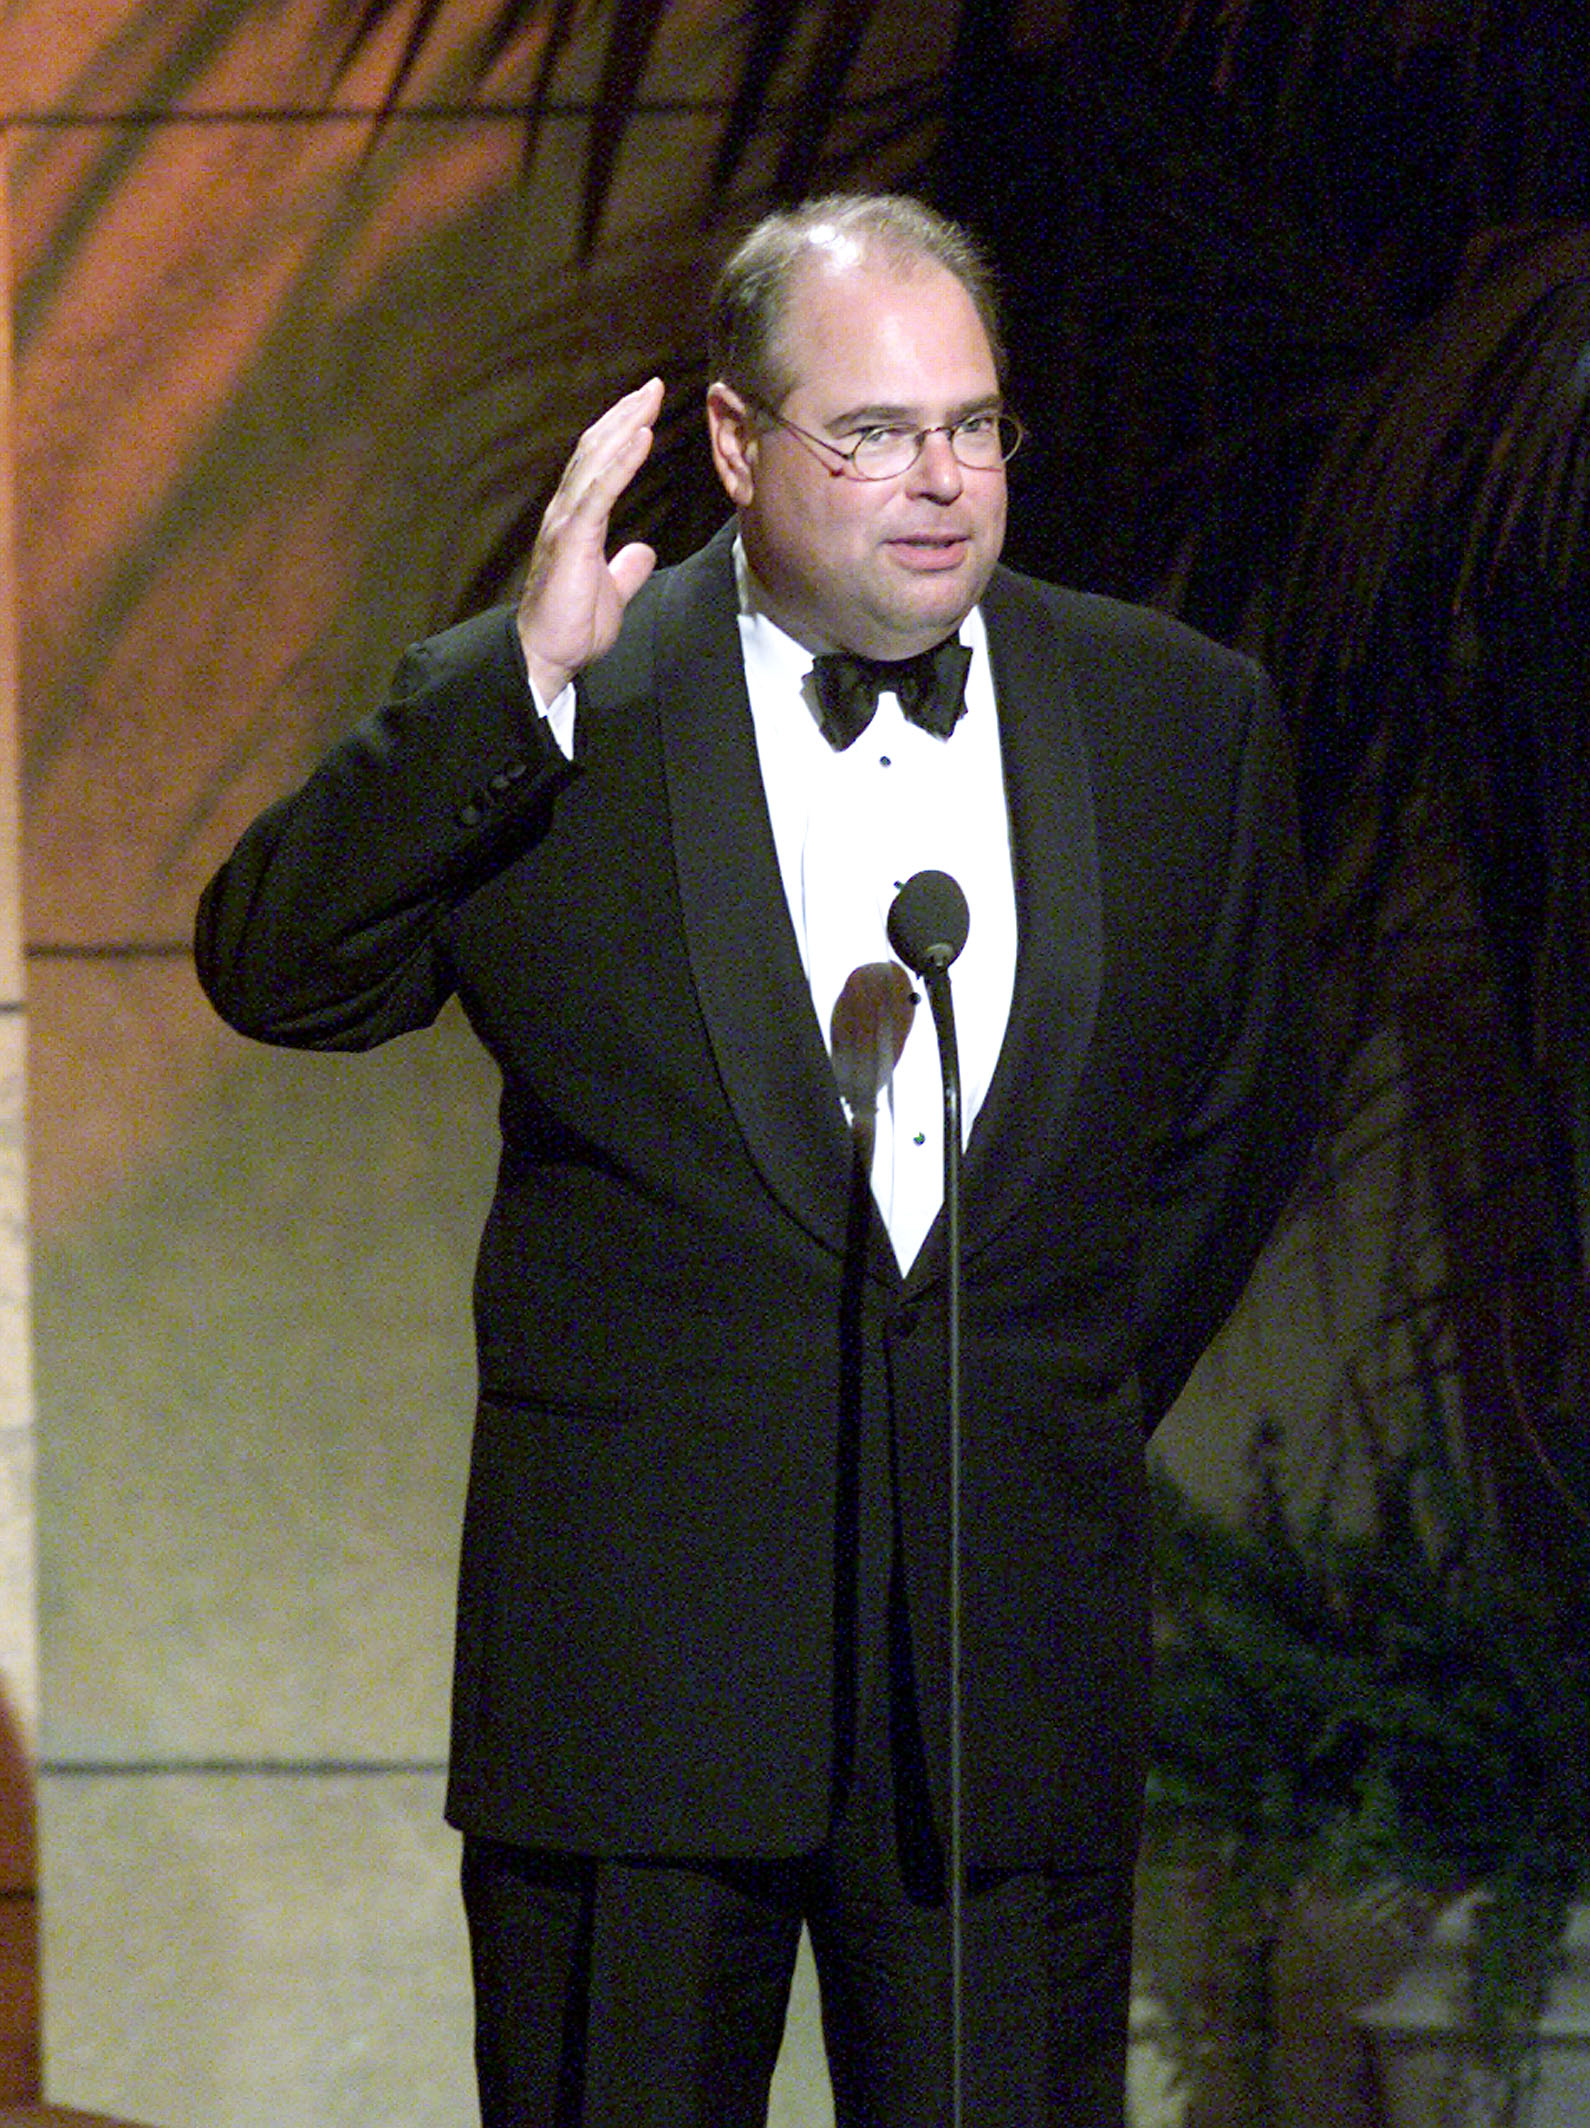 Glenn Gordon Caron at "Hollywood Salutes Bruce Willis: An American Cinematheque Tribute" in Beverly Hills, California on September 23, 2000. | Source: Getty Images